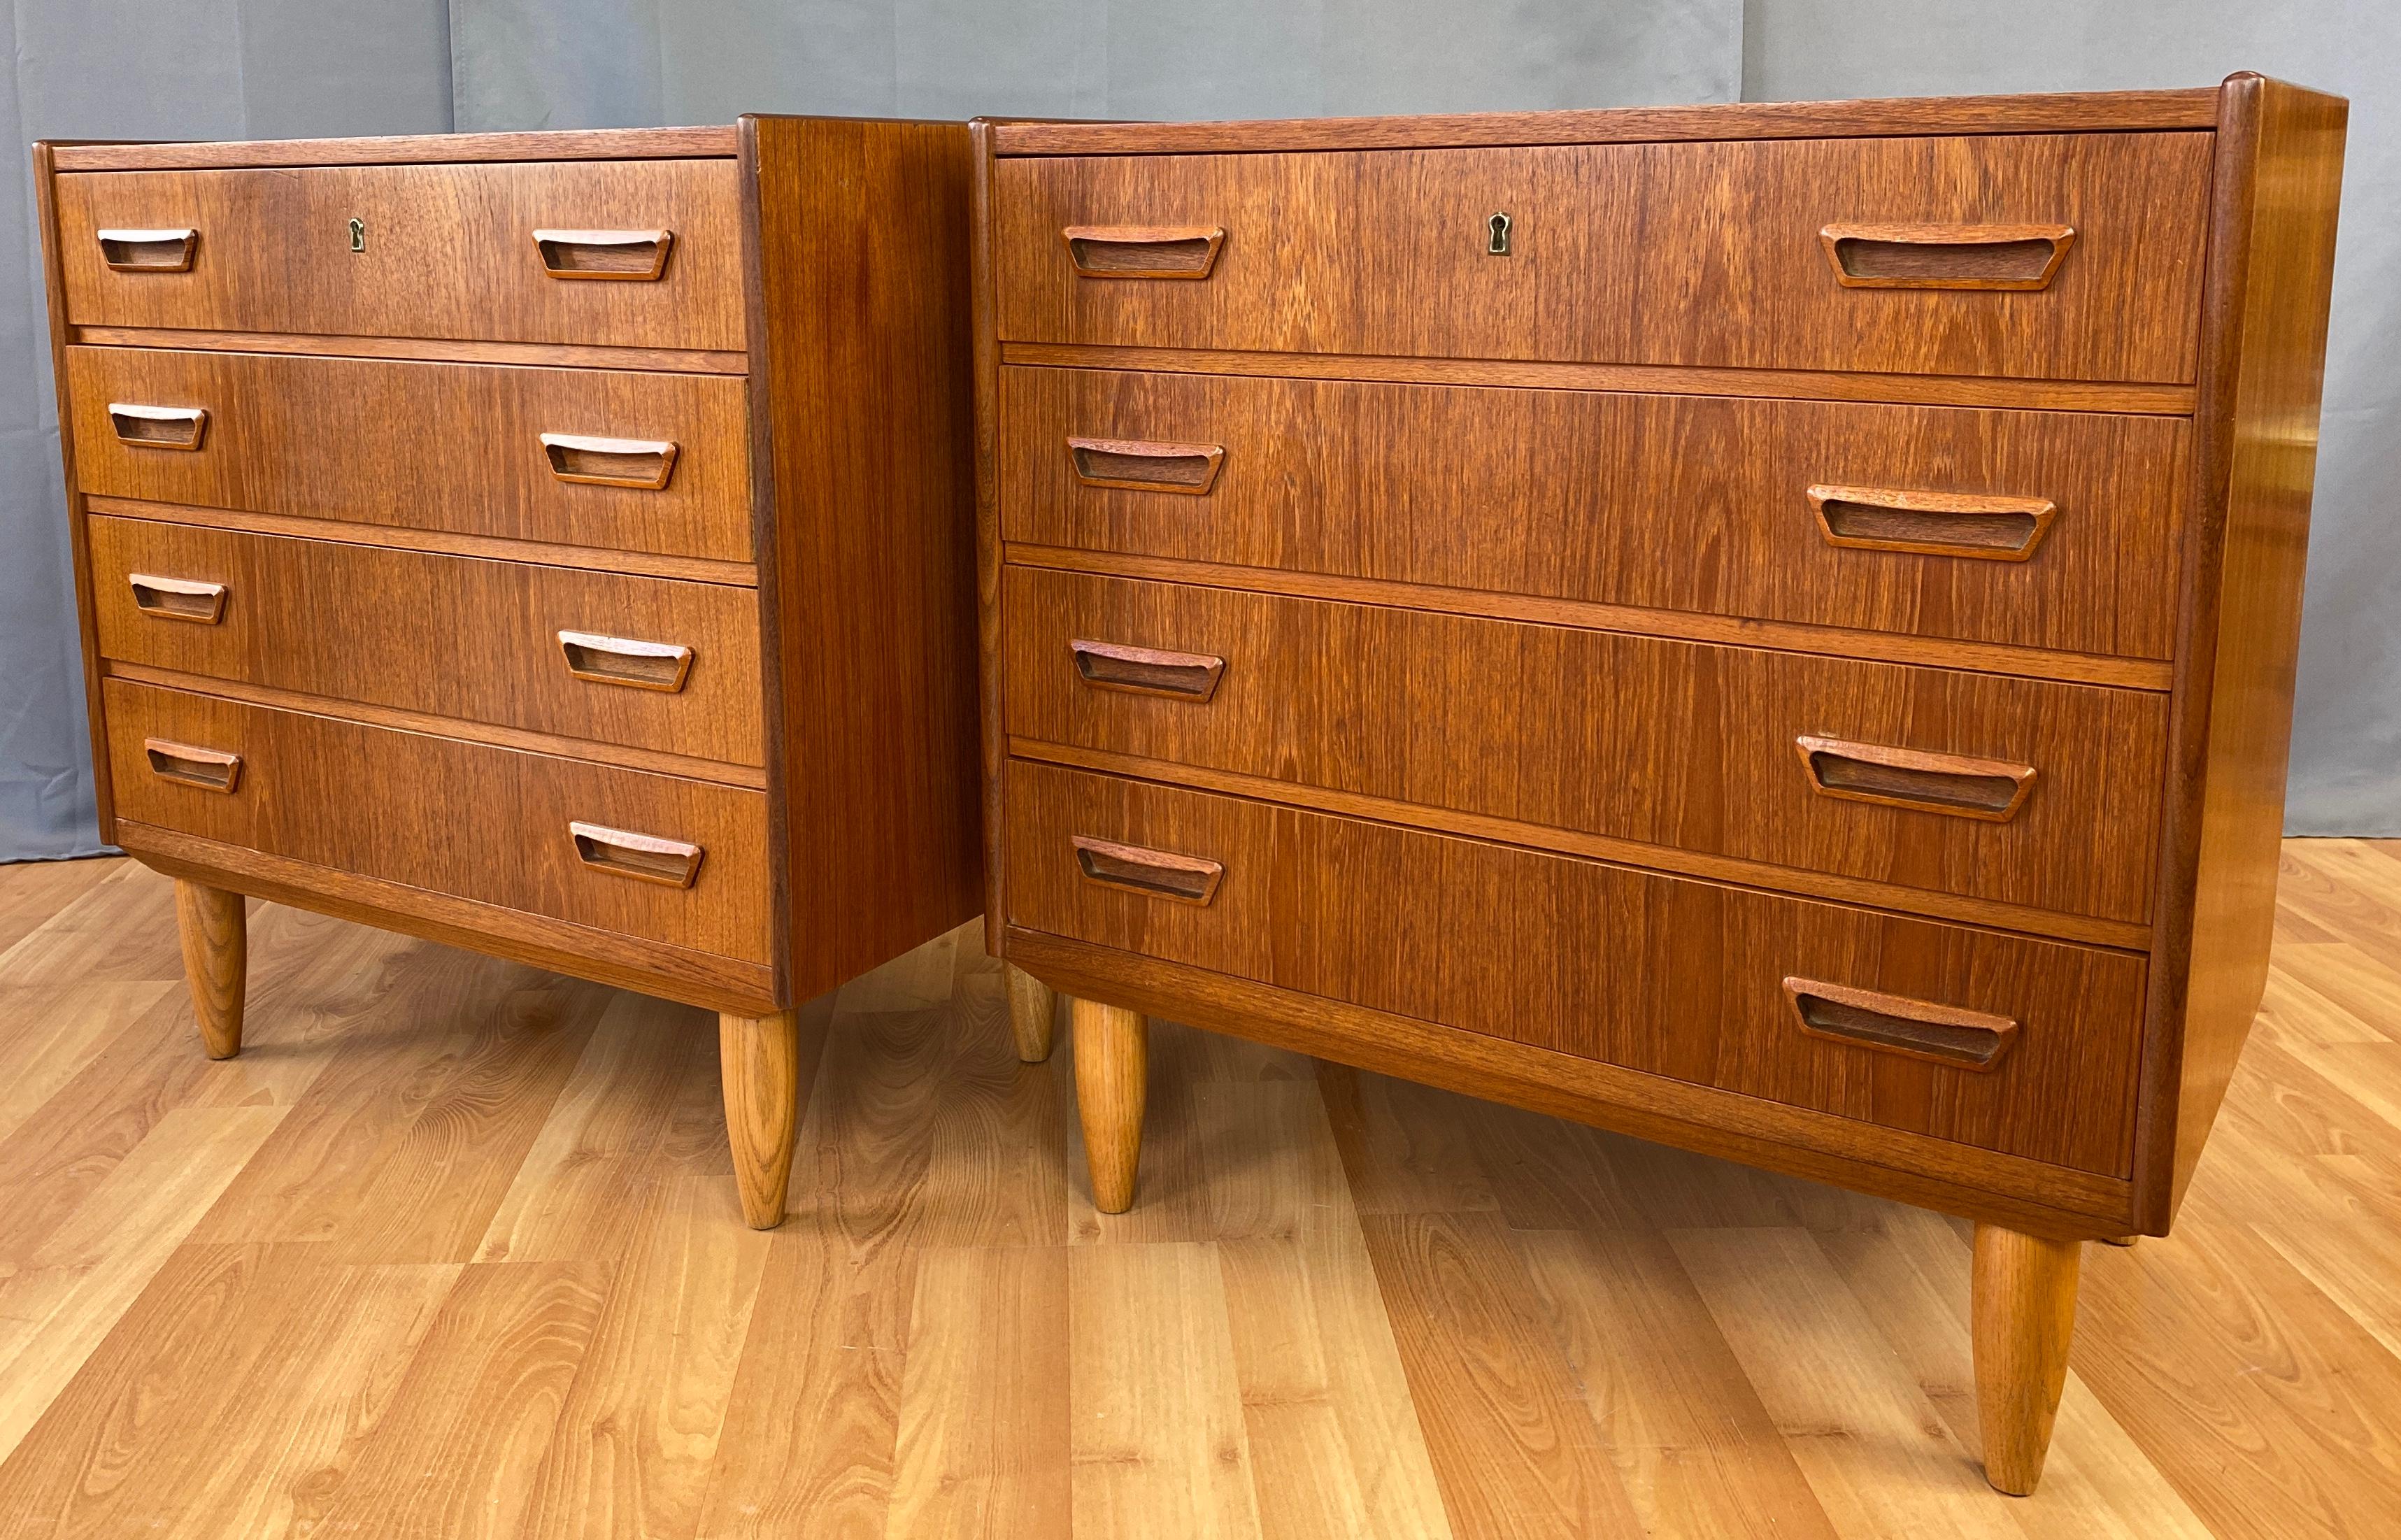 Offered here is a pair of handsome Danish modern teak dressers by Dyrlund, they would also work nicely as nightstands.
Each has four drawers that are about 3 3/4 inches deep, with dovetail joints, each drawer has pair of smart carved teak handles,